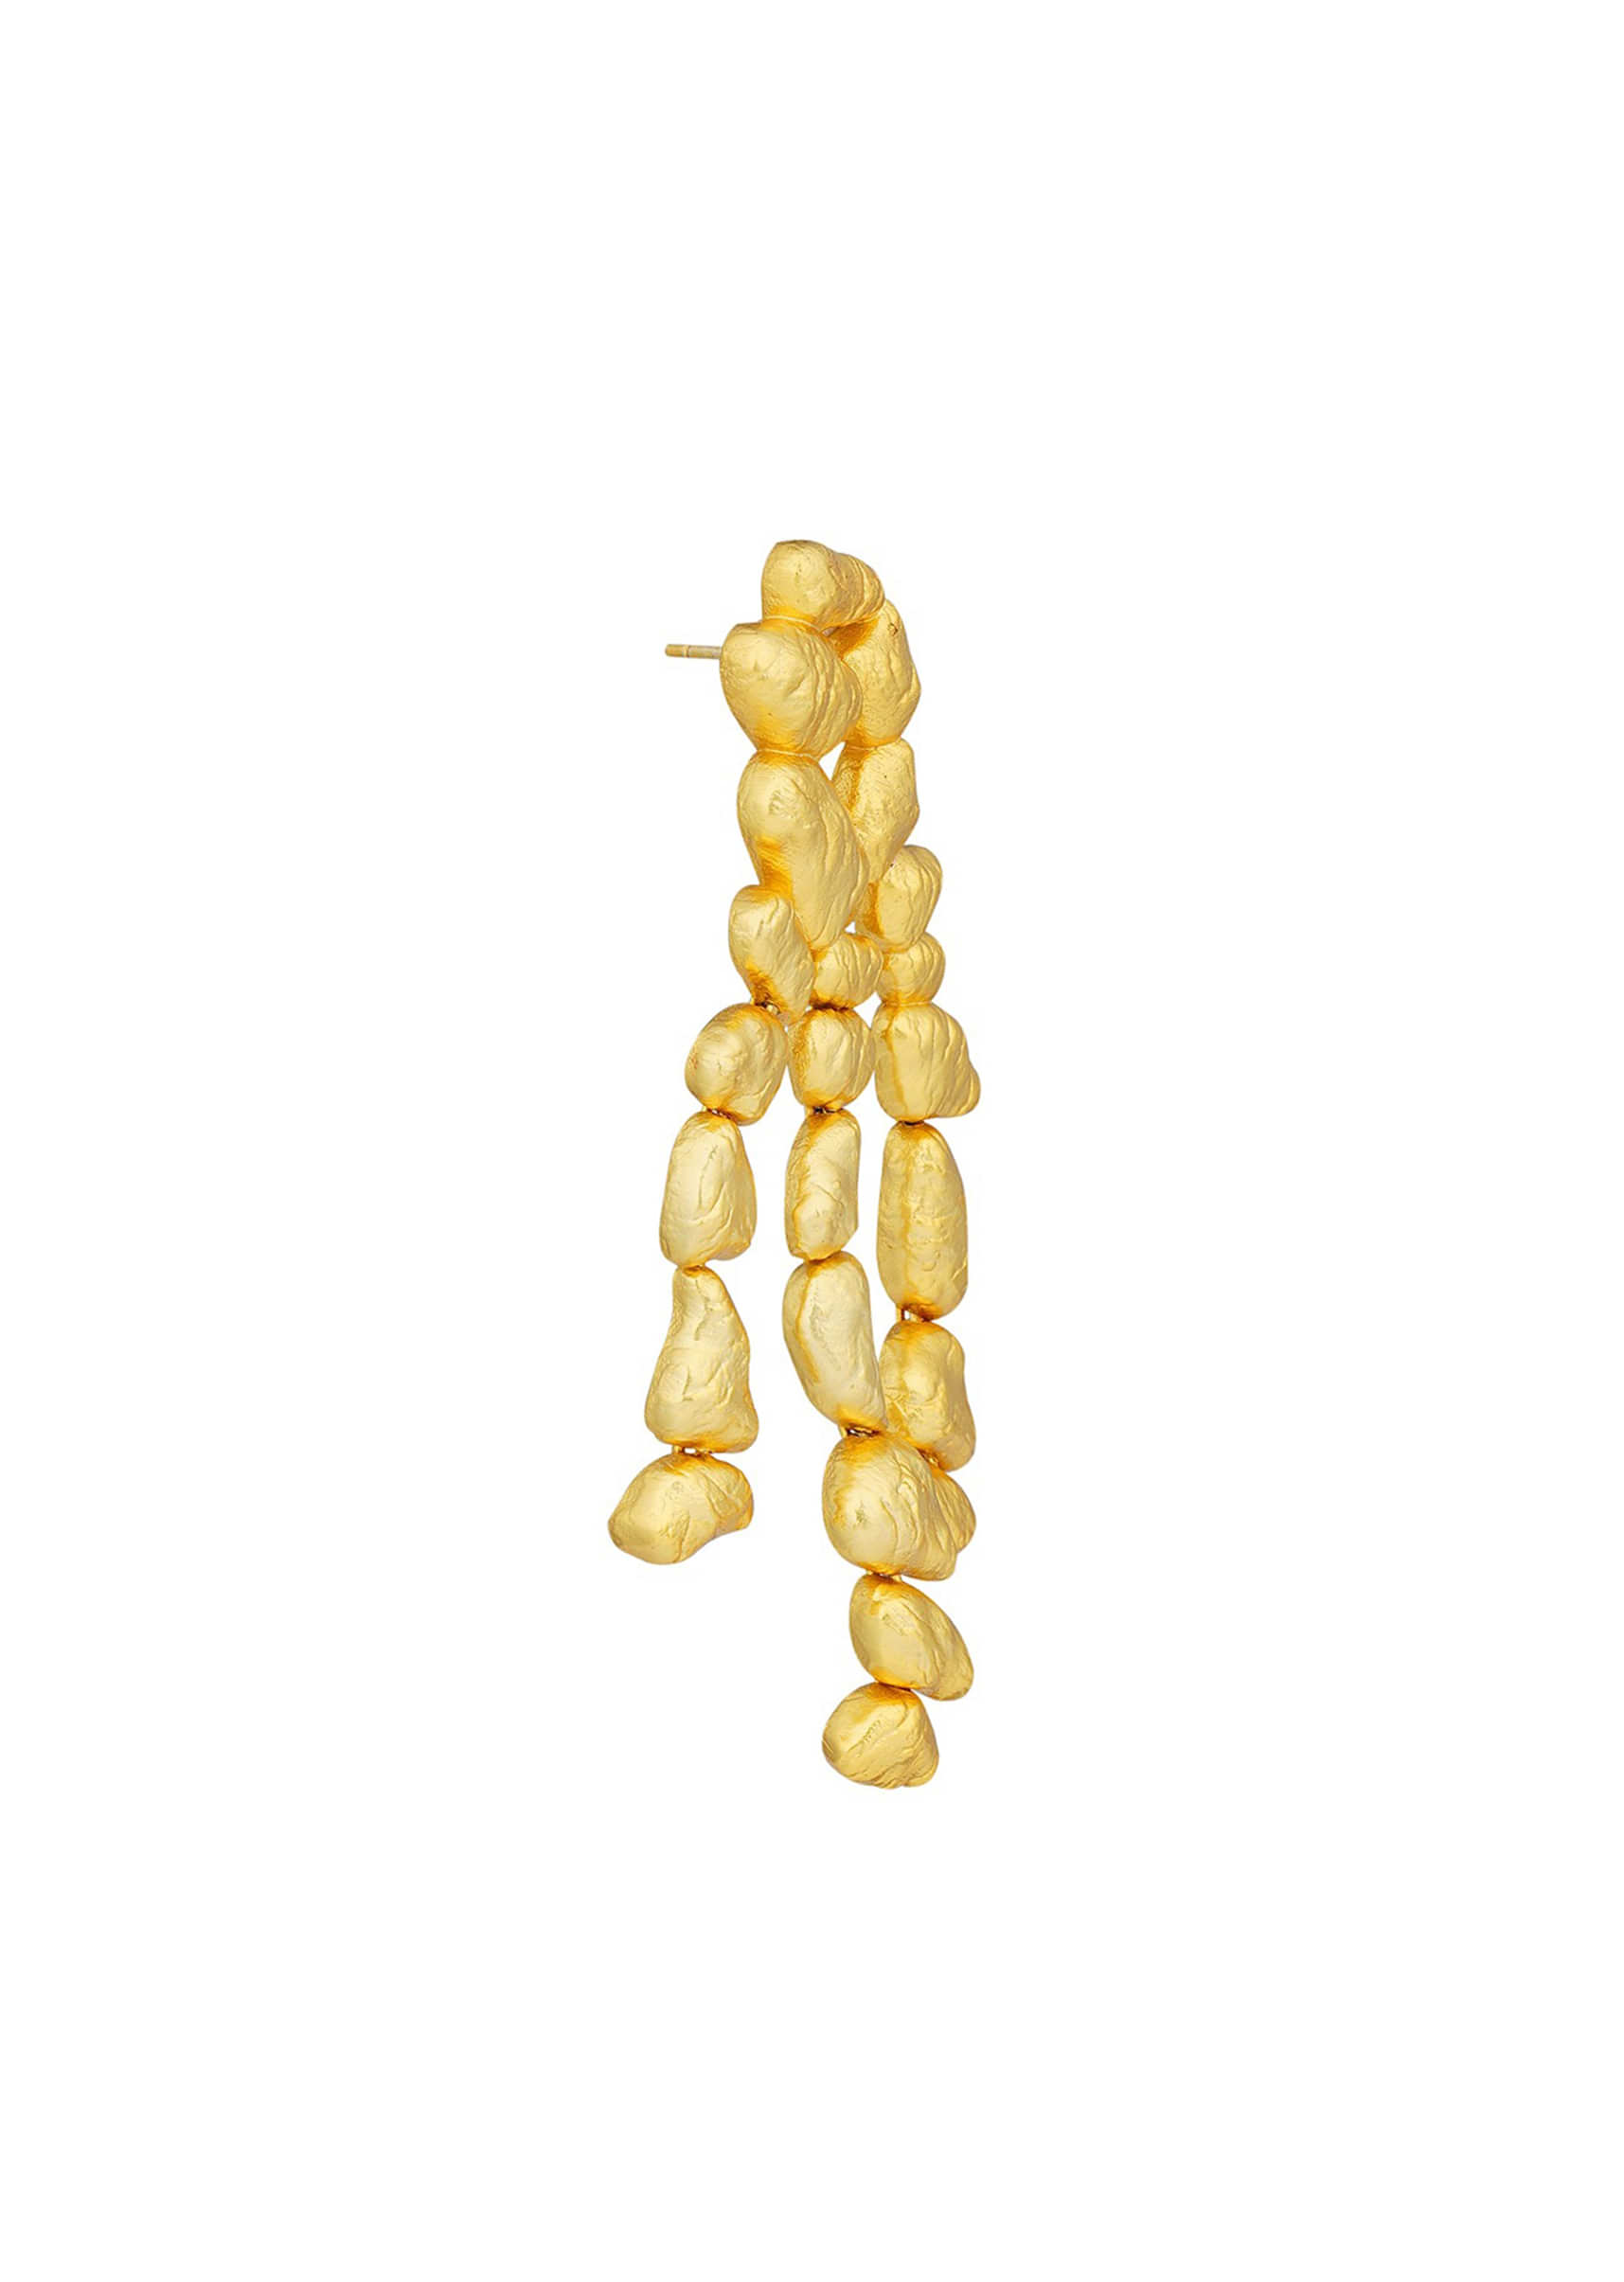 22k Gold Plated Gold Nuggets Statement Earrings